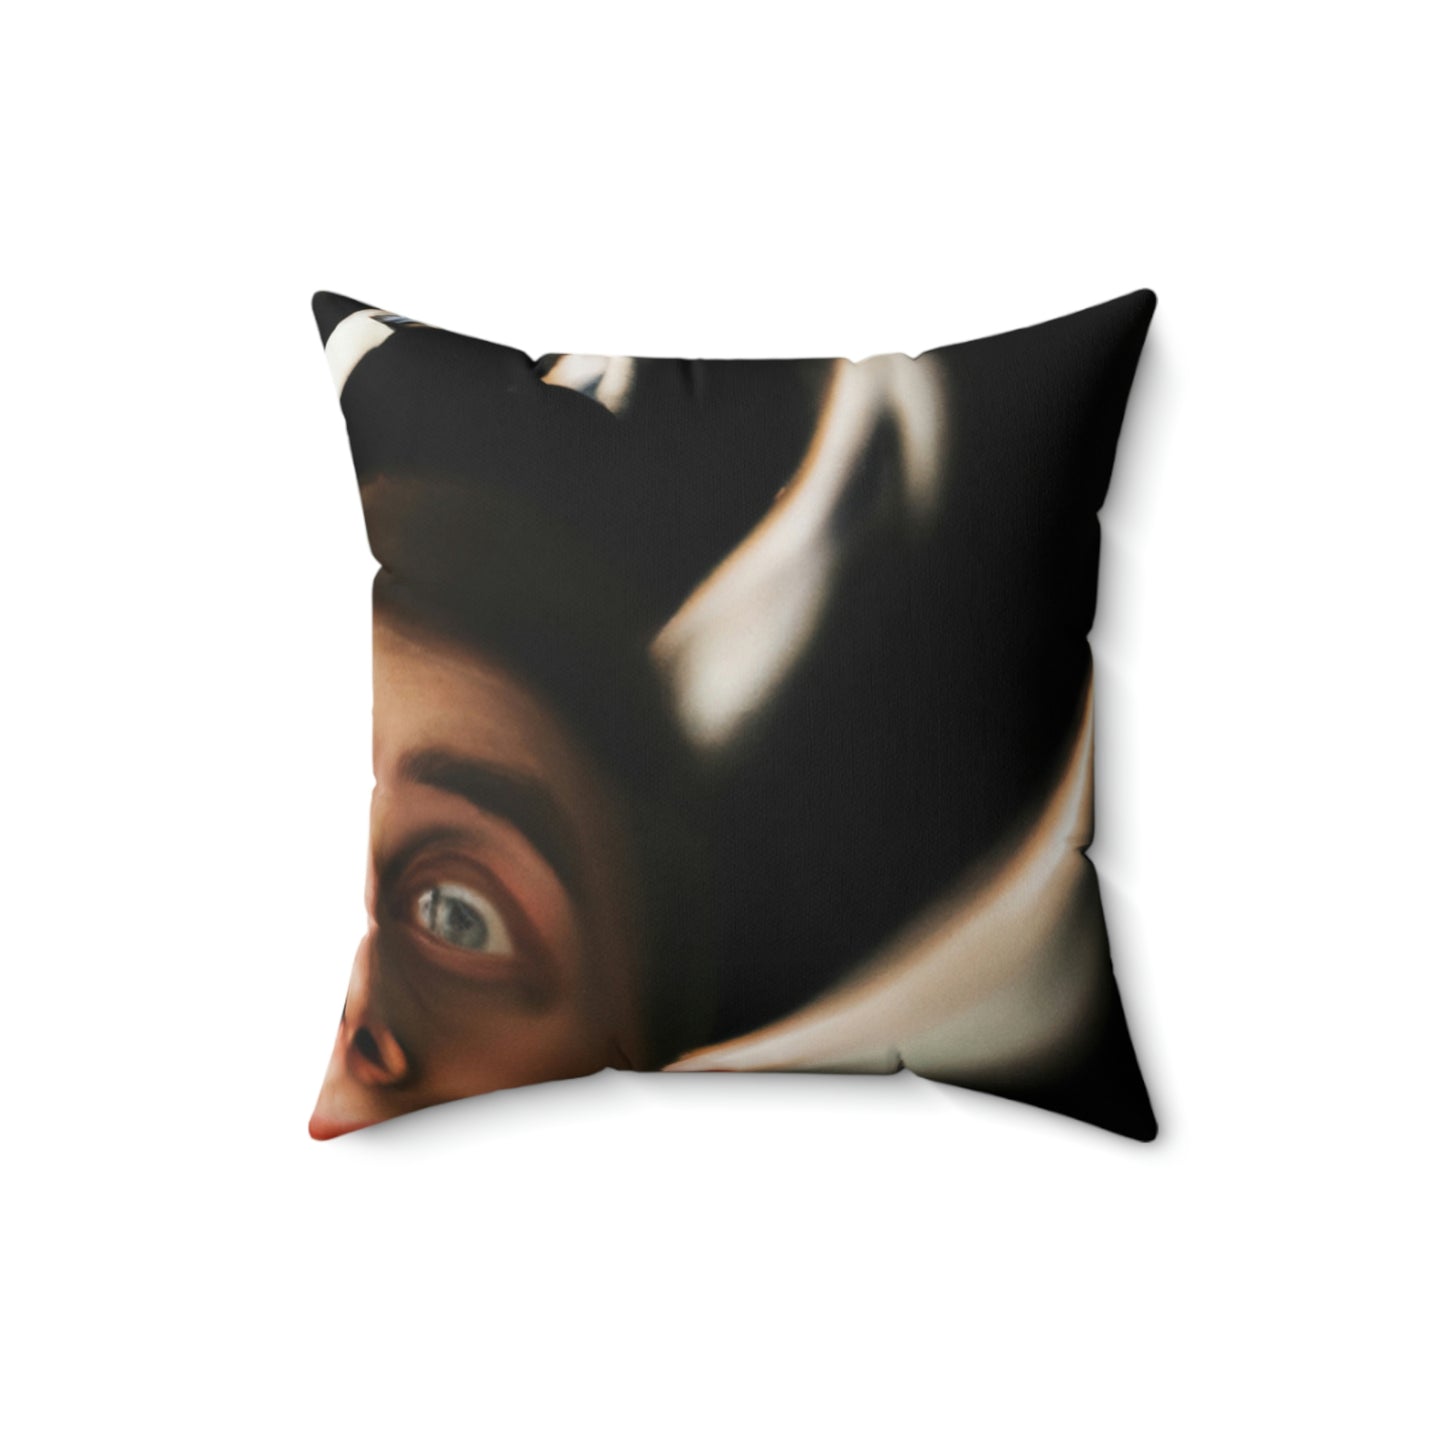 The Endless Nightmare - The Alien Square Pillow